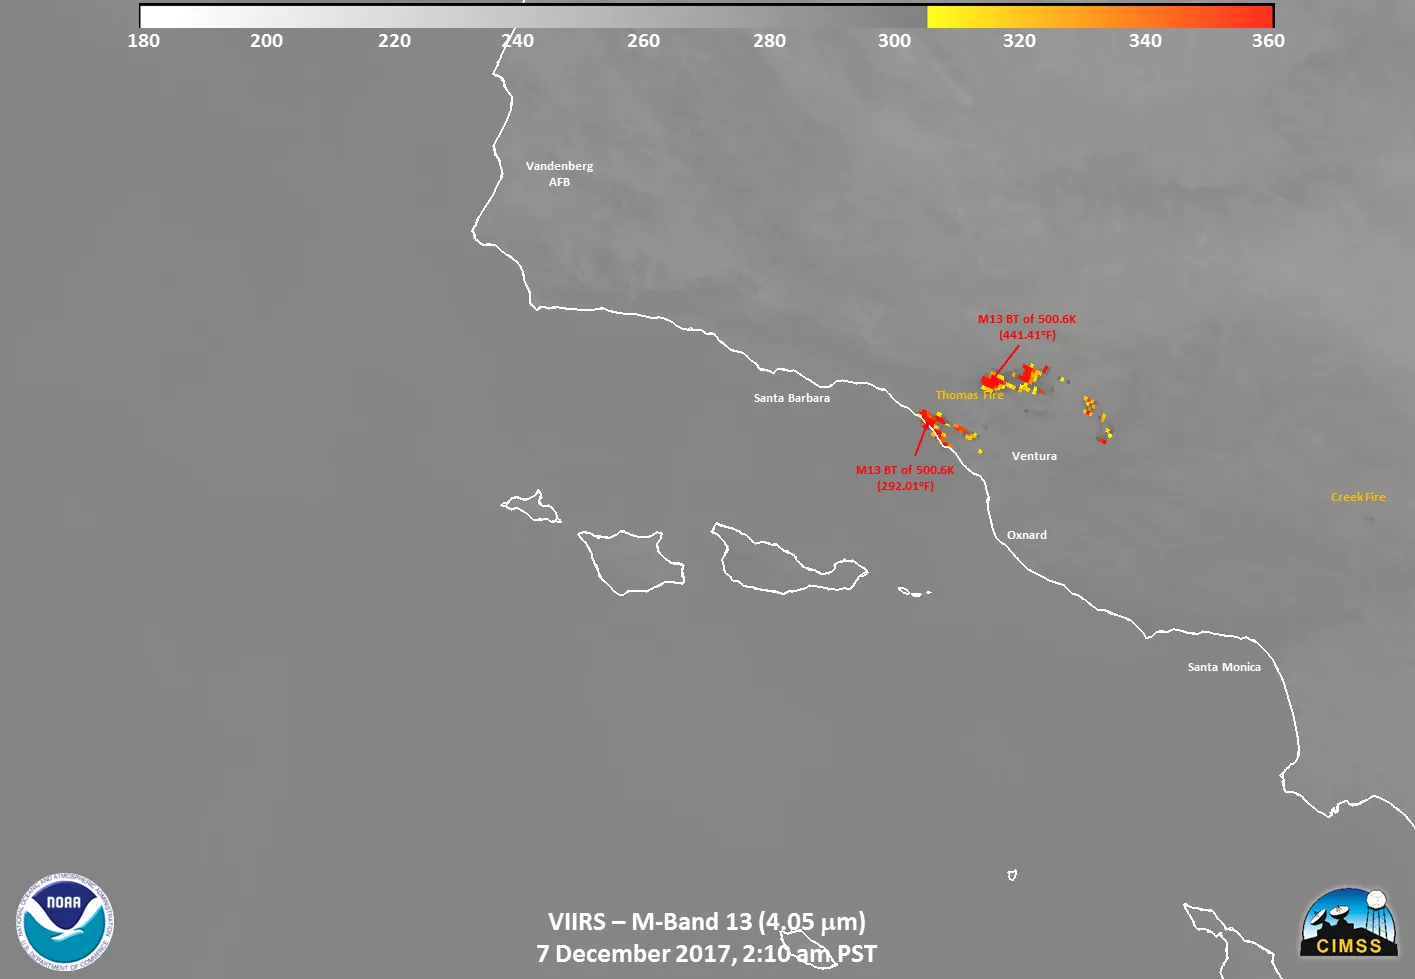 This image shows VIIRS’s “Fire” channel (Band M-13), which is a slightly different channel than the previous one used for fire detection. The brightness of the pixels shows fire temperatures up to 500.6K (441.41oF). The red areas in the hills outside of Ventura and along the coast show where the fire is burning the hottest.